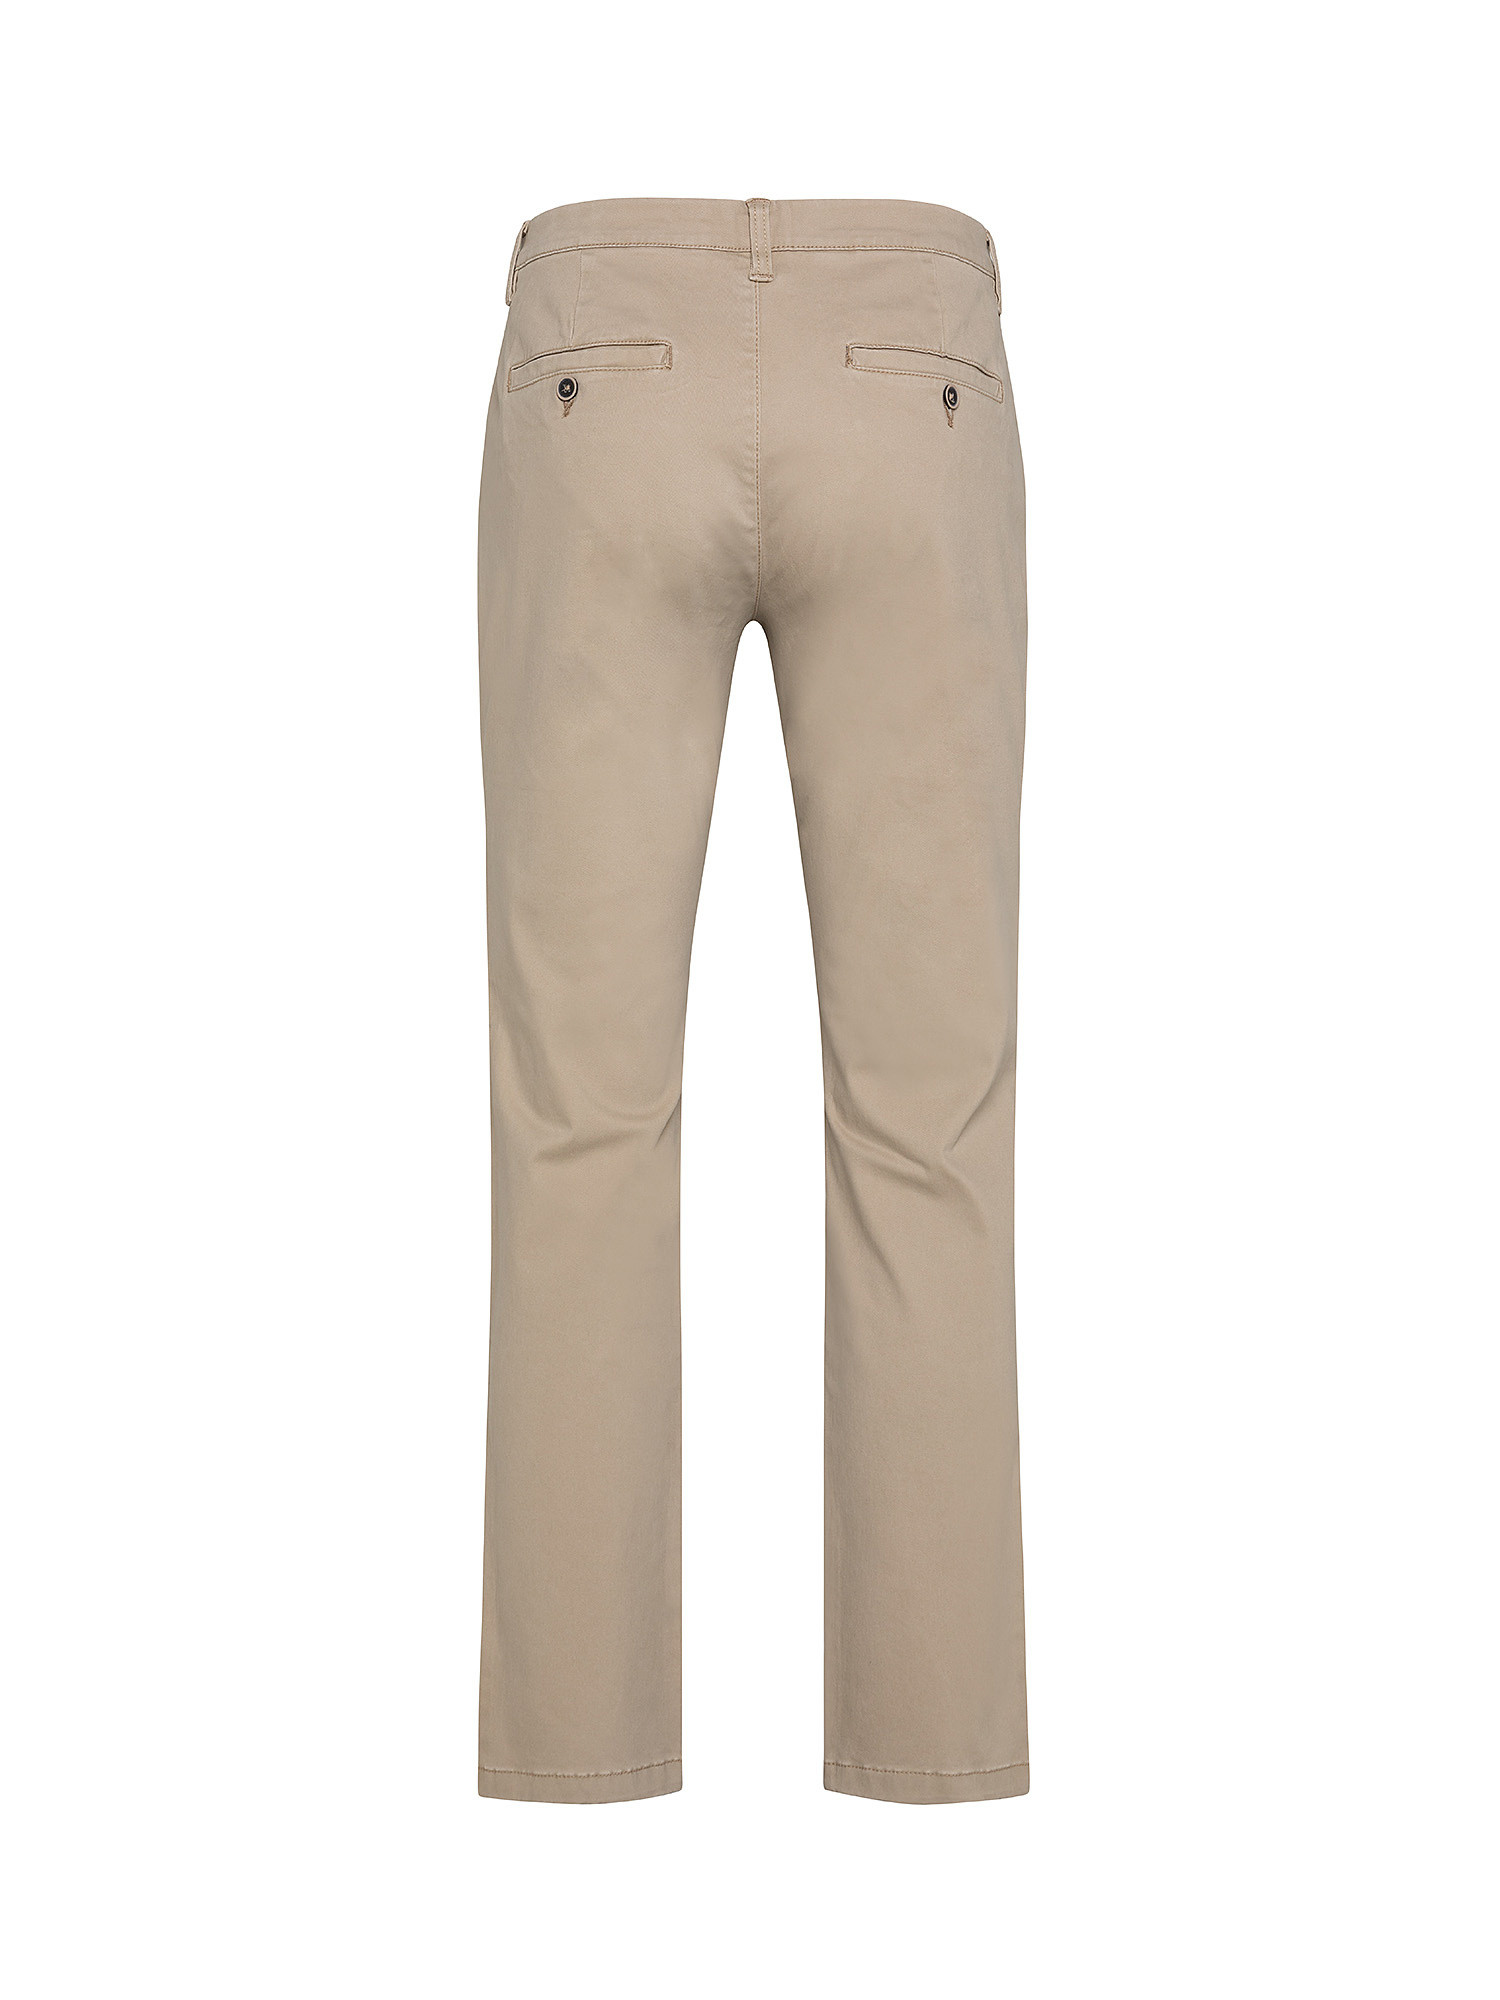 Slim comfort fit trousers in stretch cotton, Beige, large image number 1